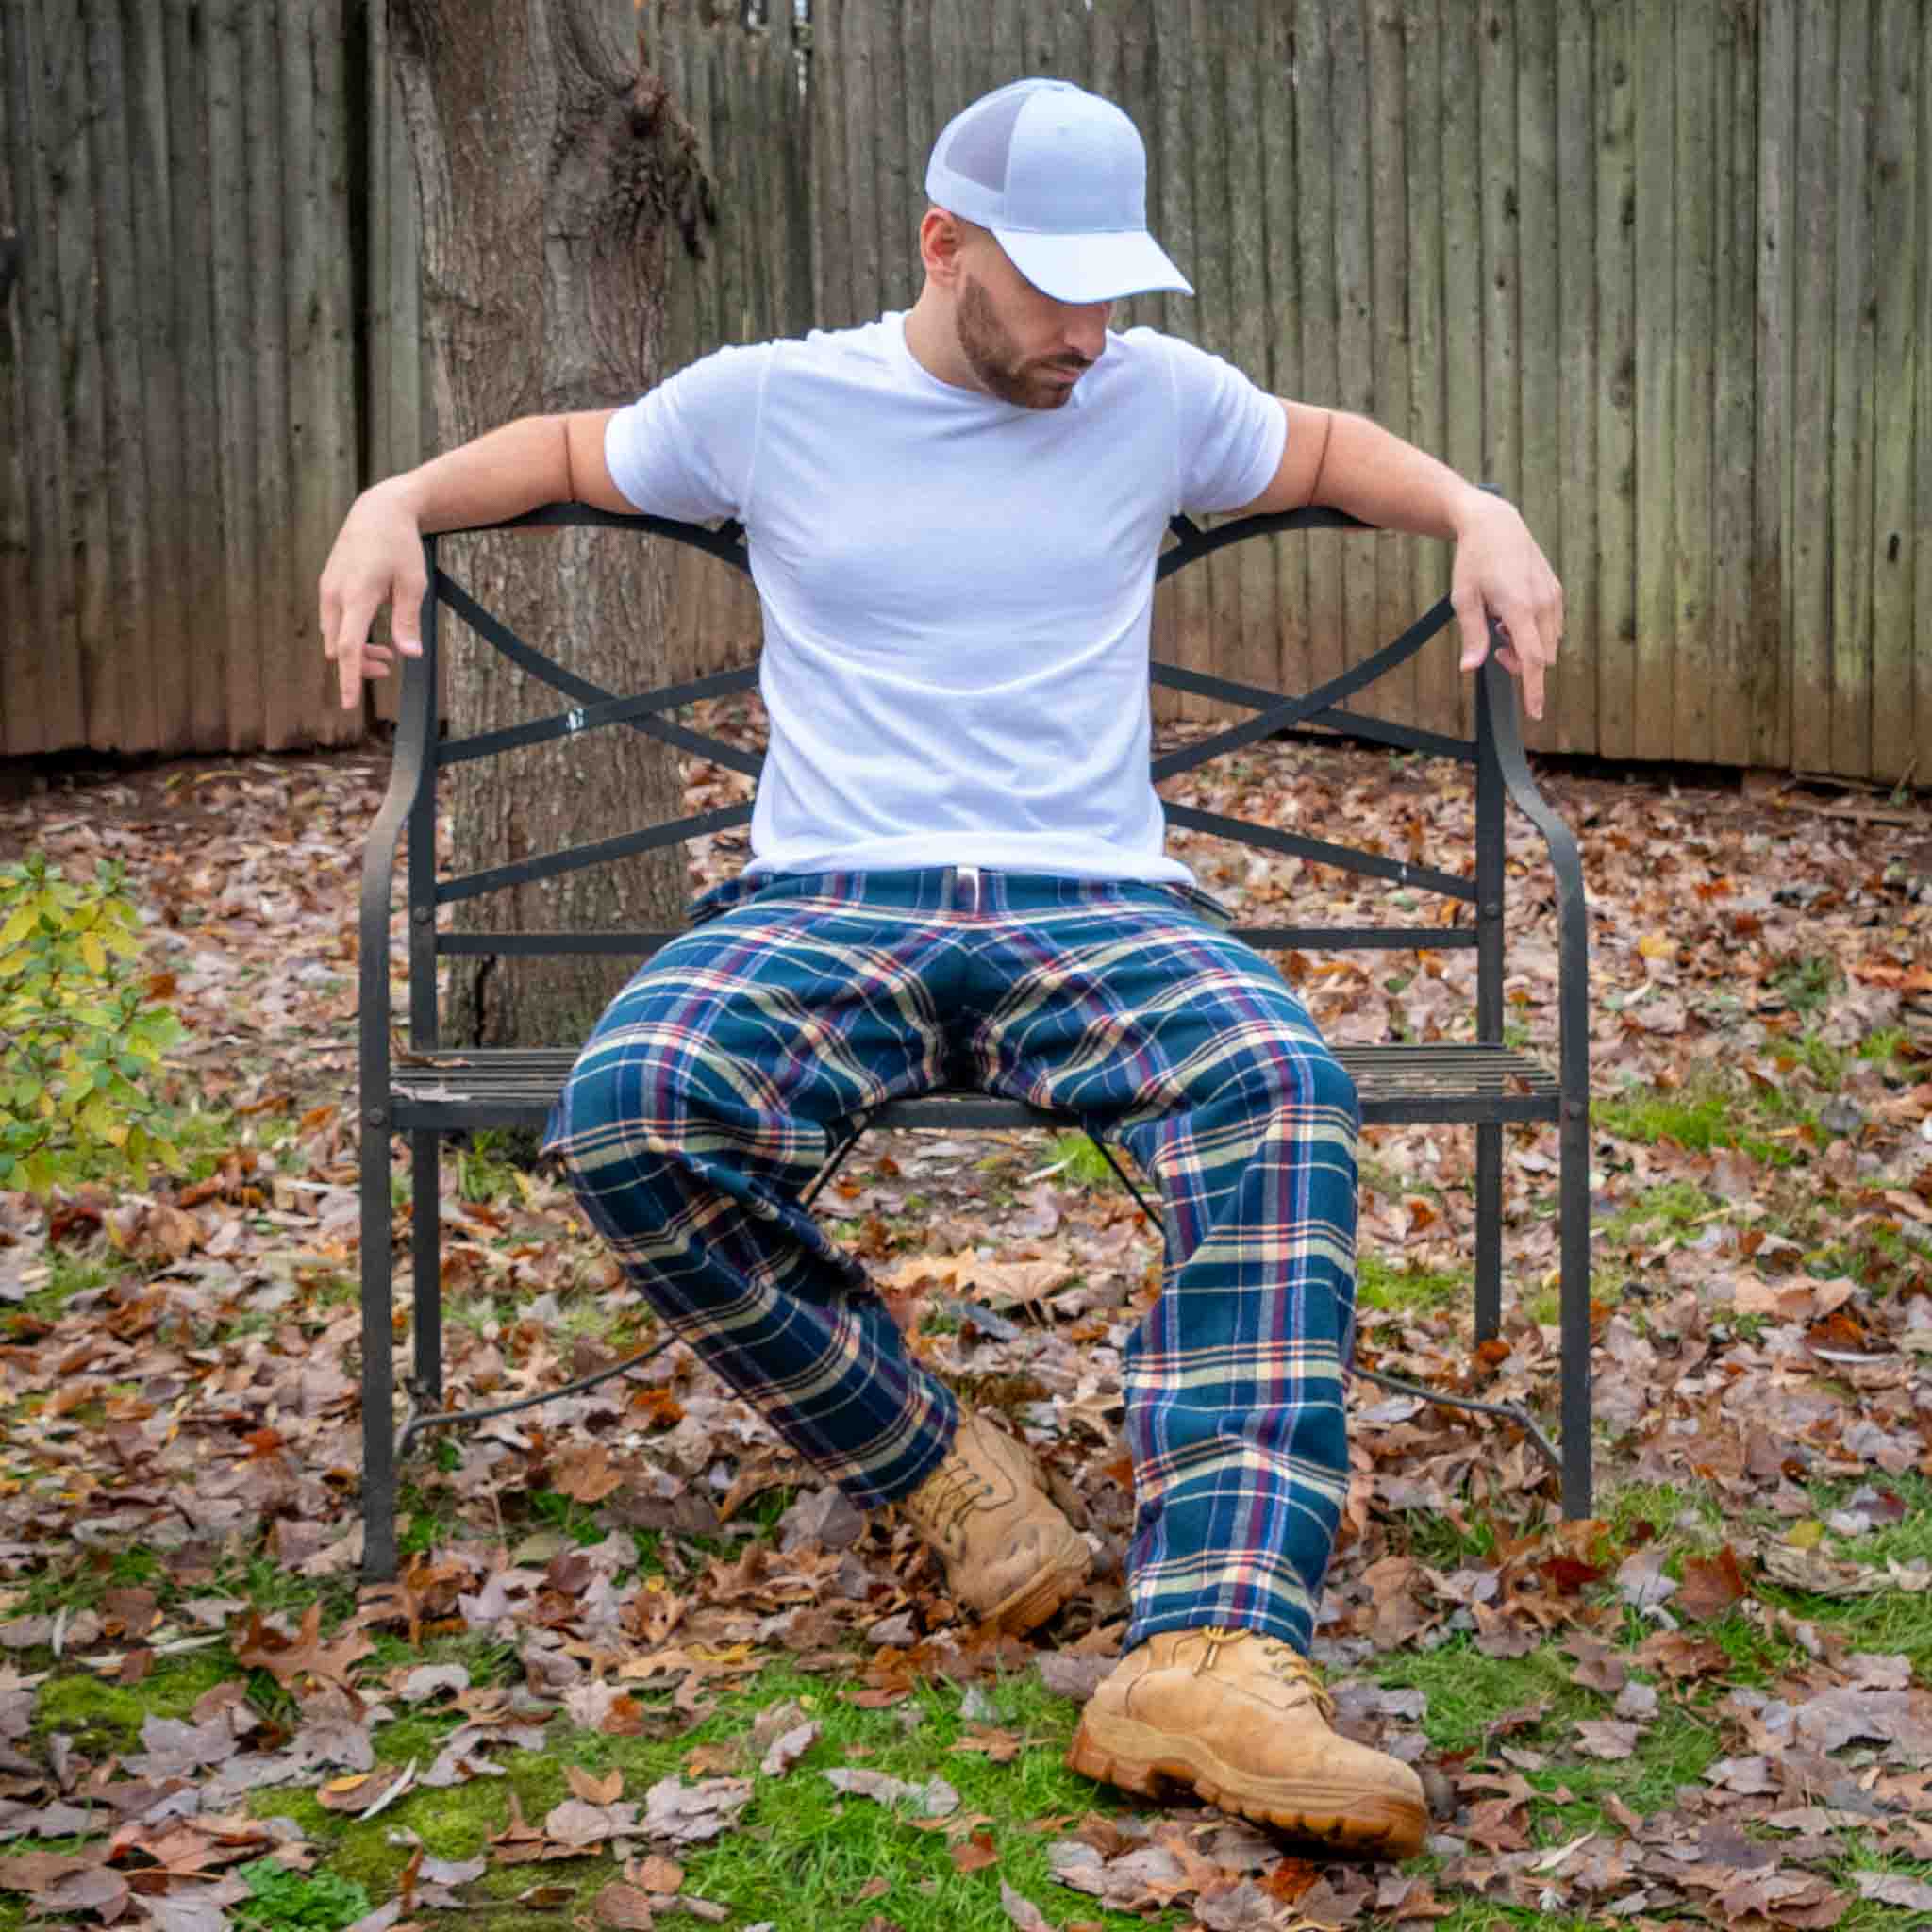 JWM Flannel Lounge Pants NavySpruceTan Compare at $185  ( Allow 1-2 weeks for delivery )